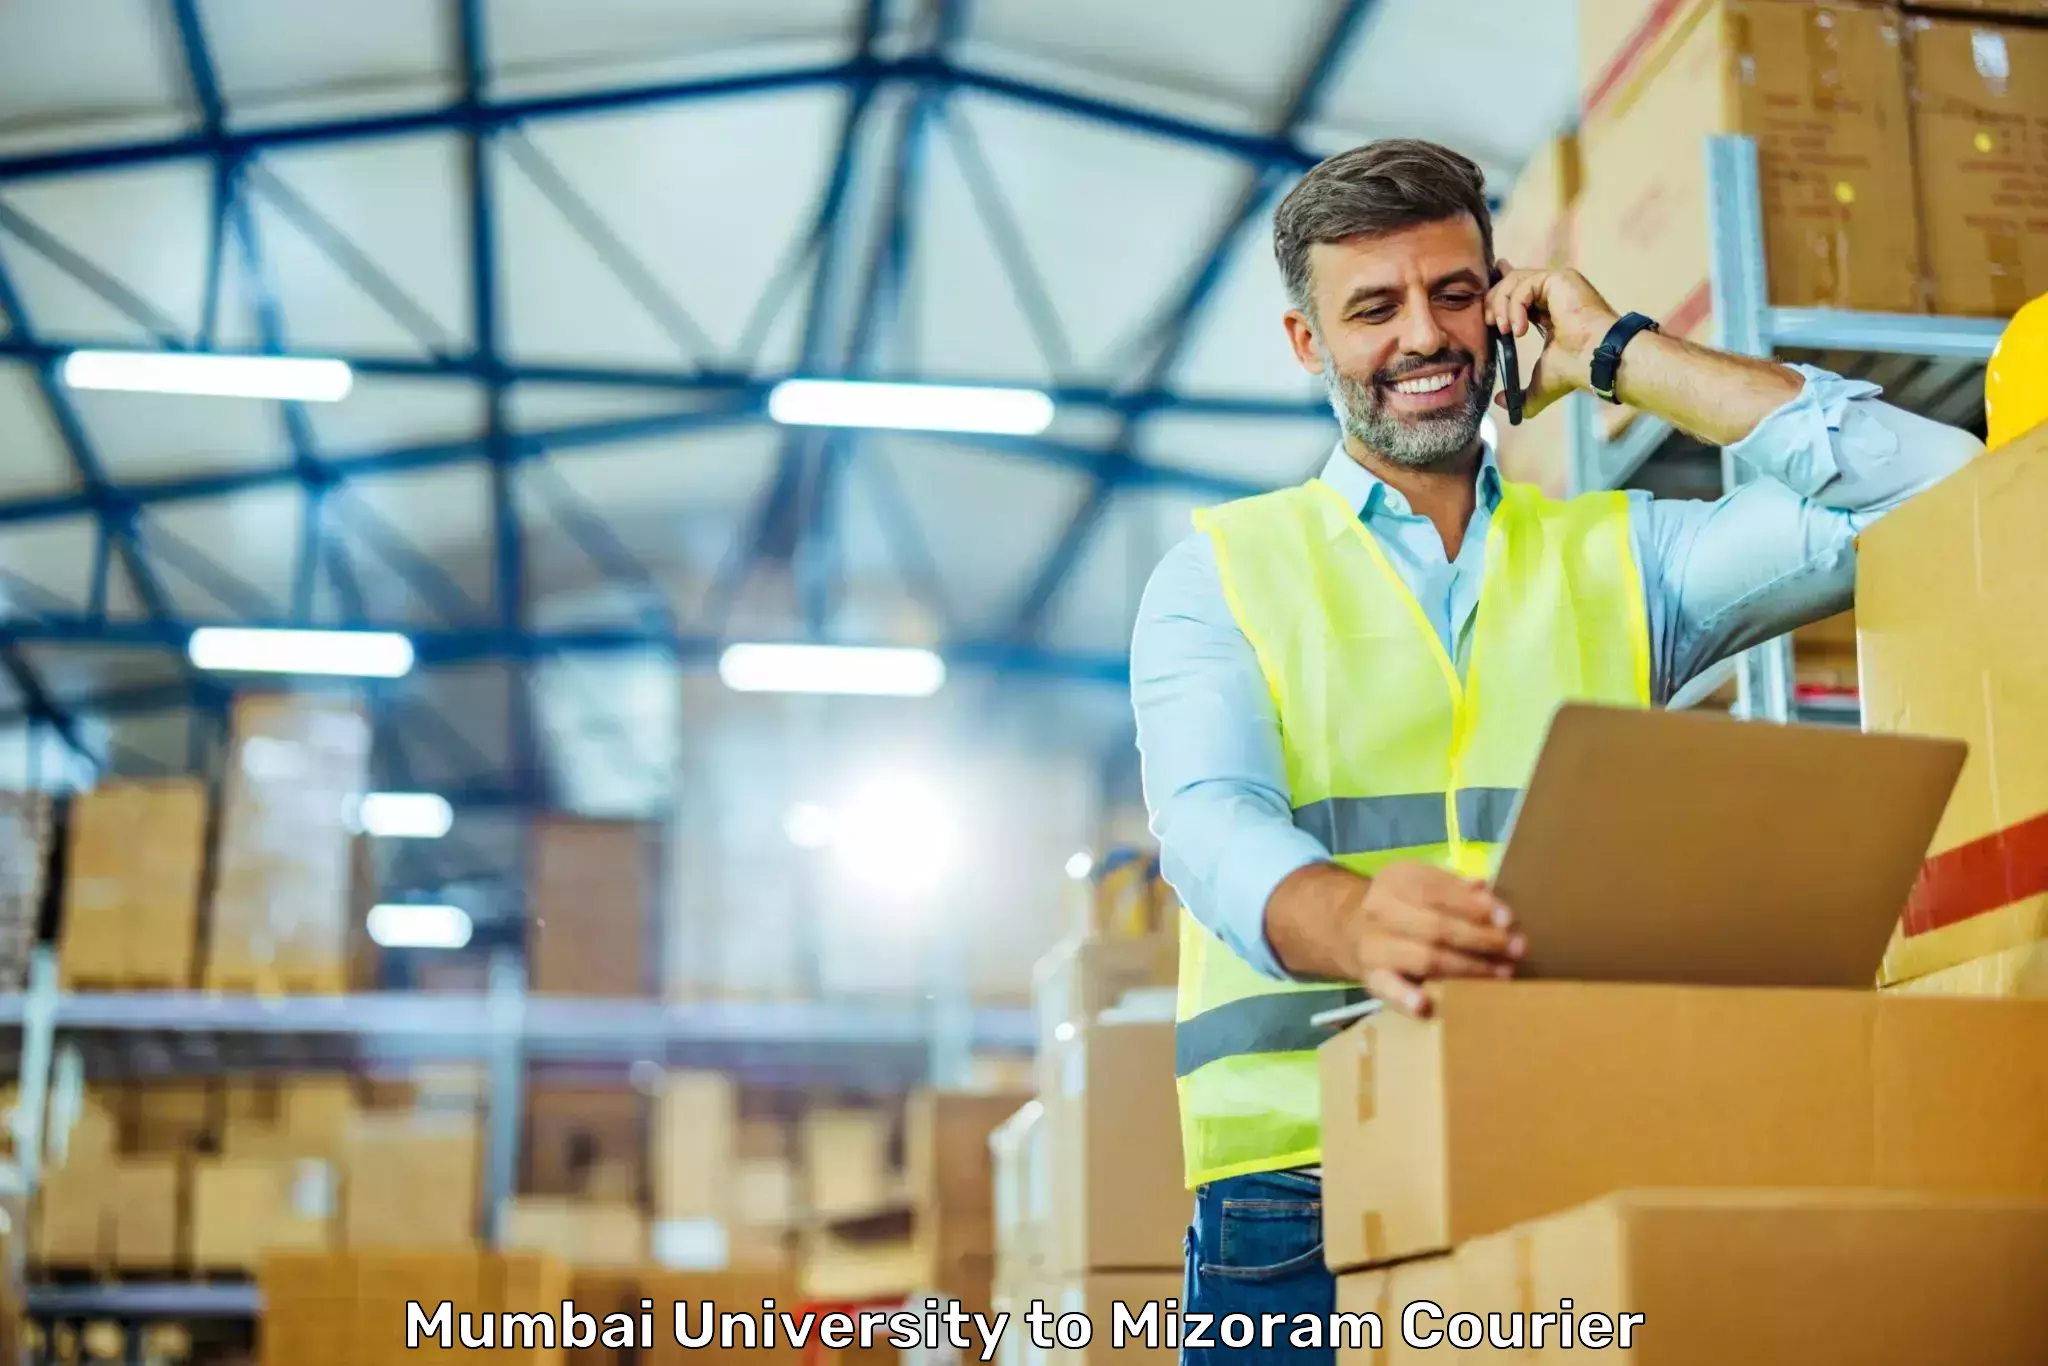 Quick courier services Mumbai University to Darlawn